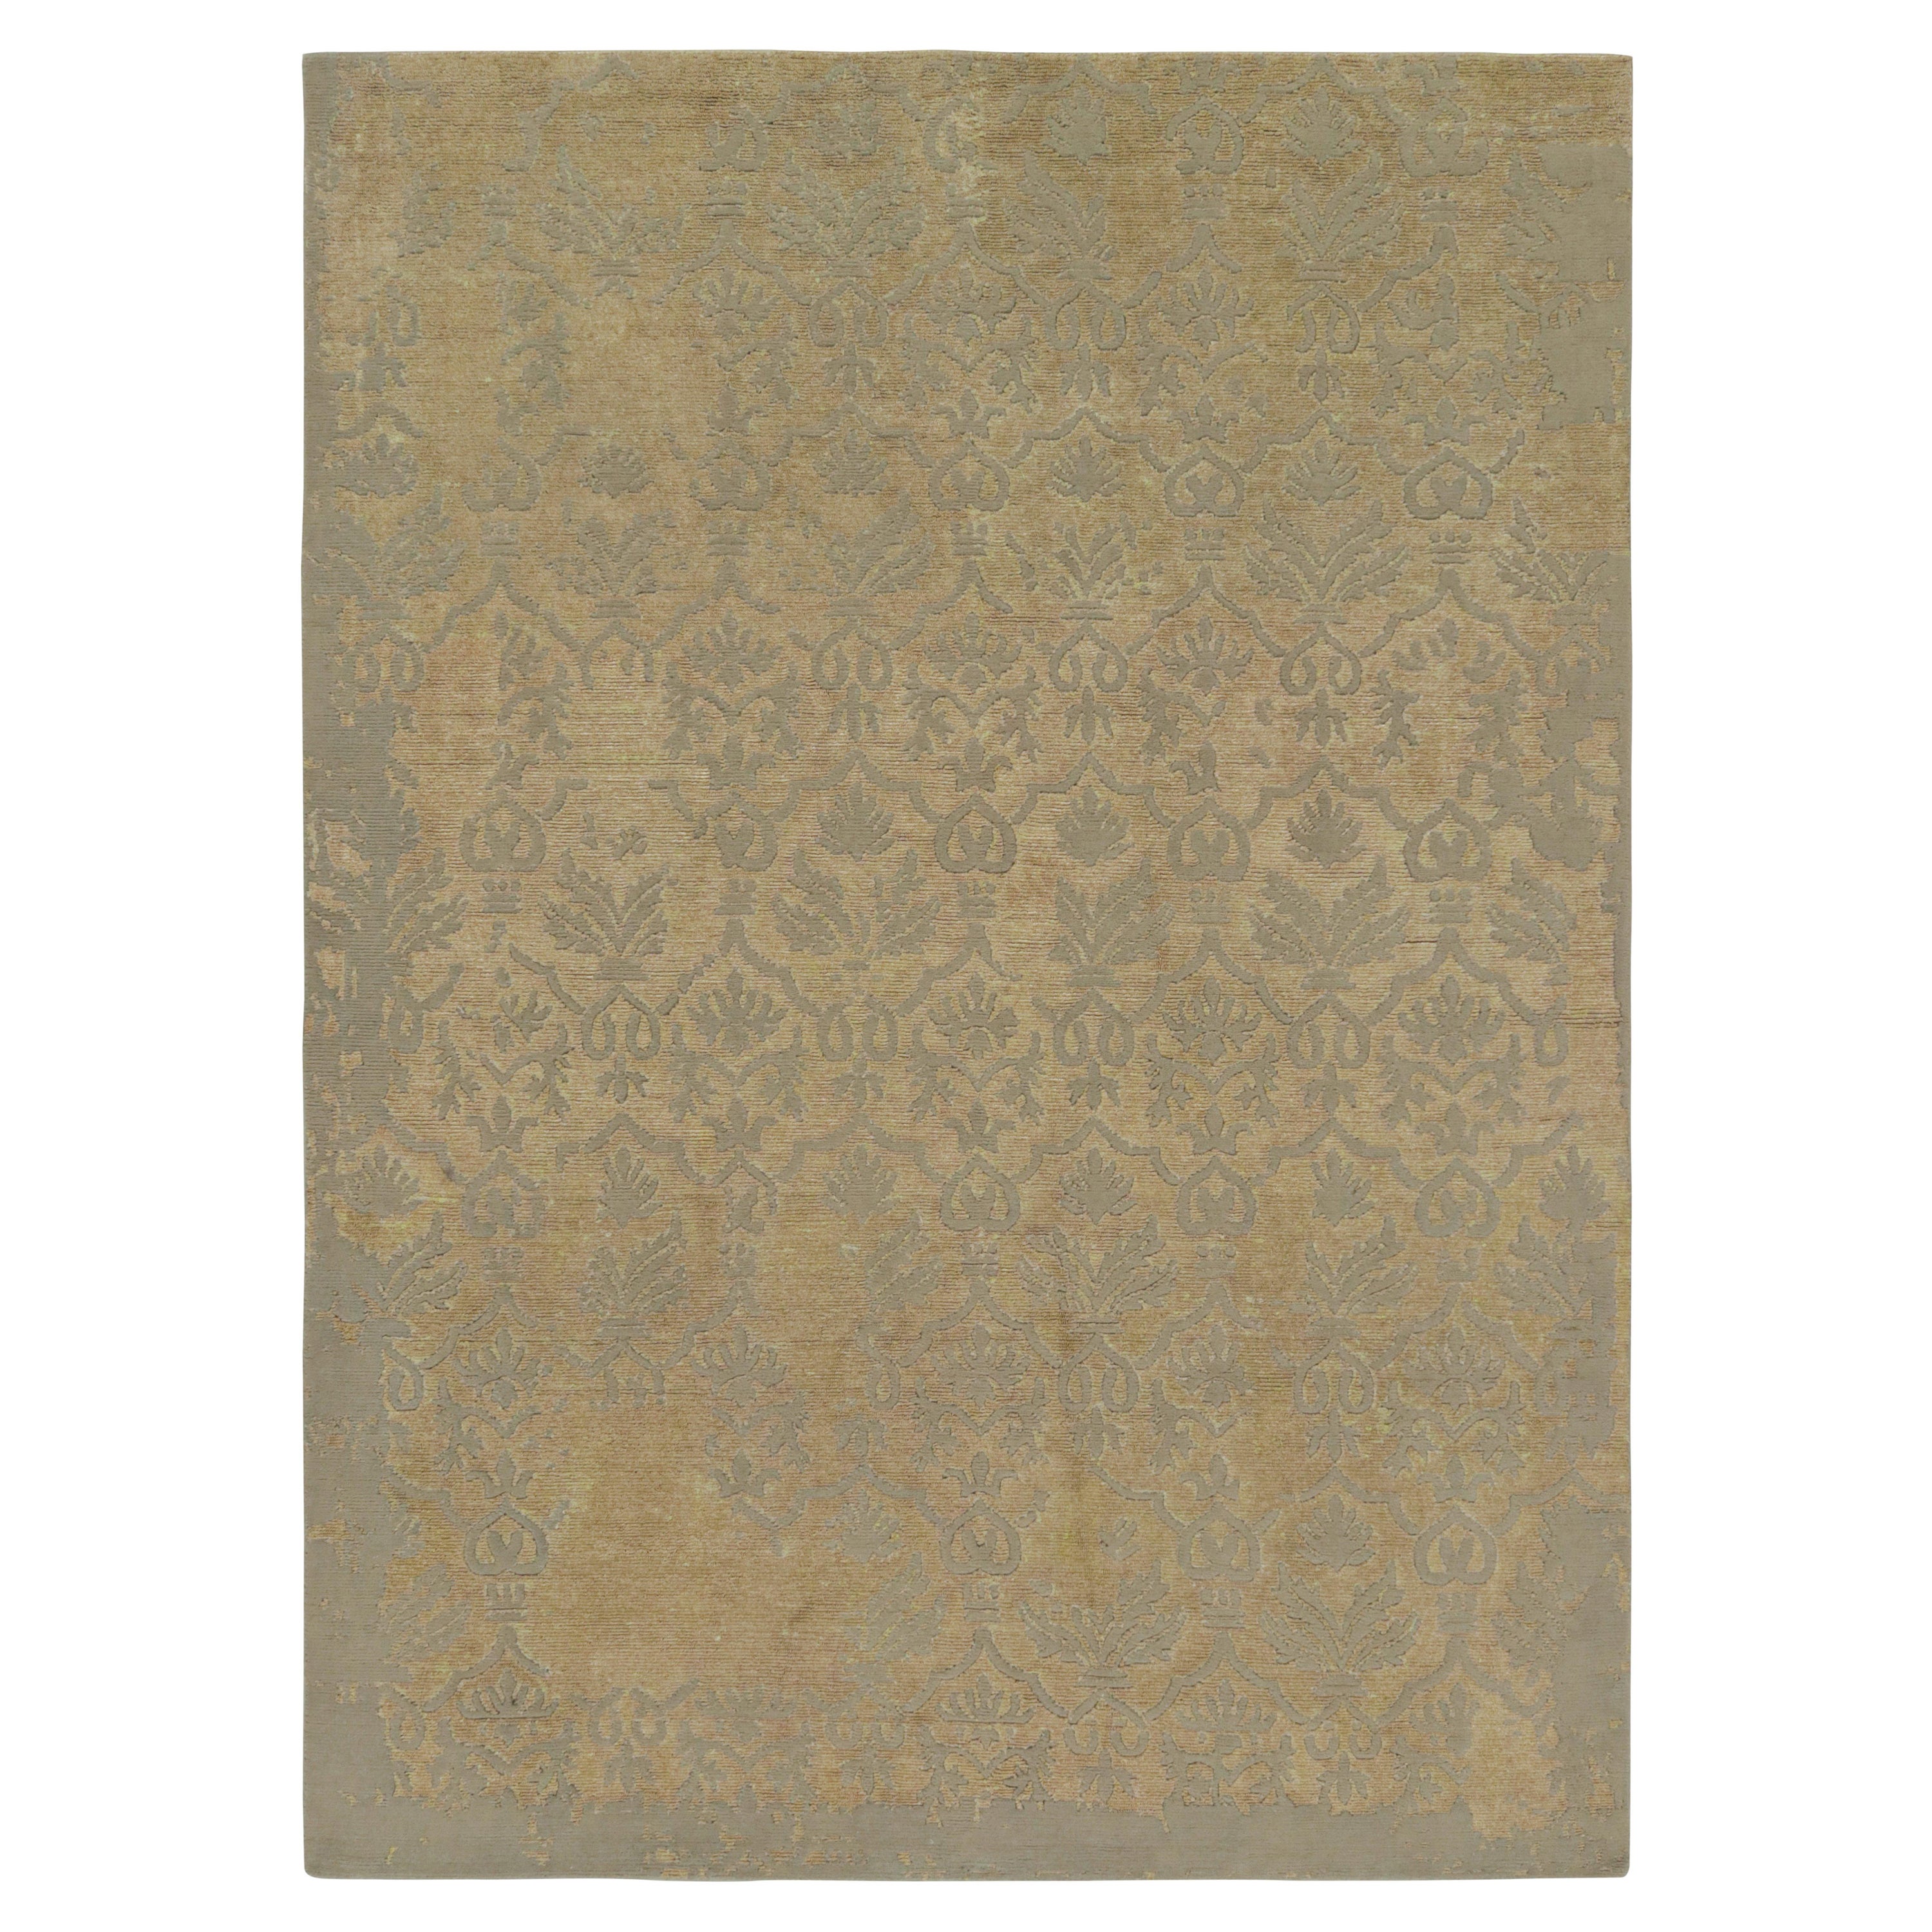 Rug & Kilim’s European-Style Rug in Gold with Trellises and Floral Patterns